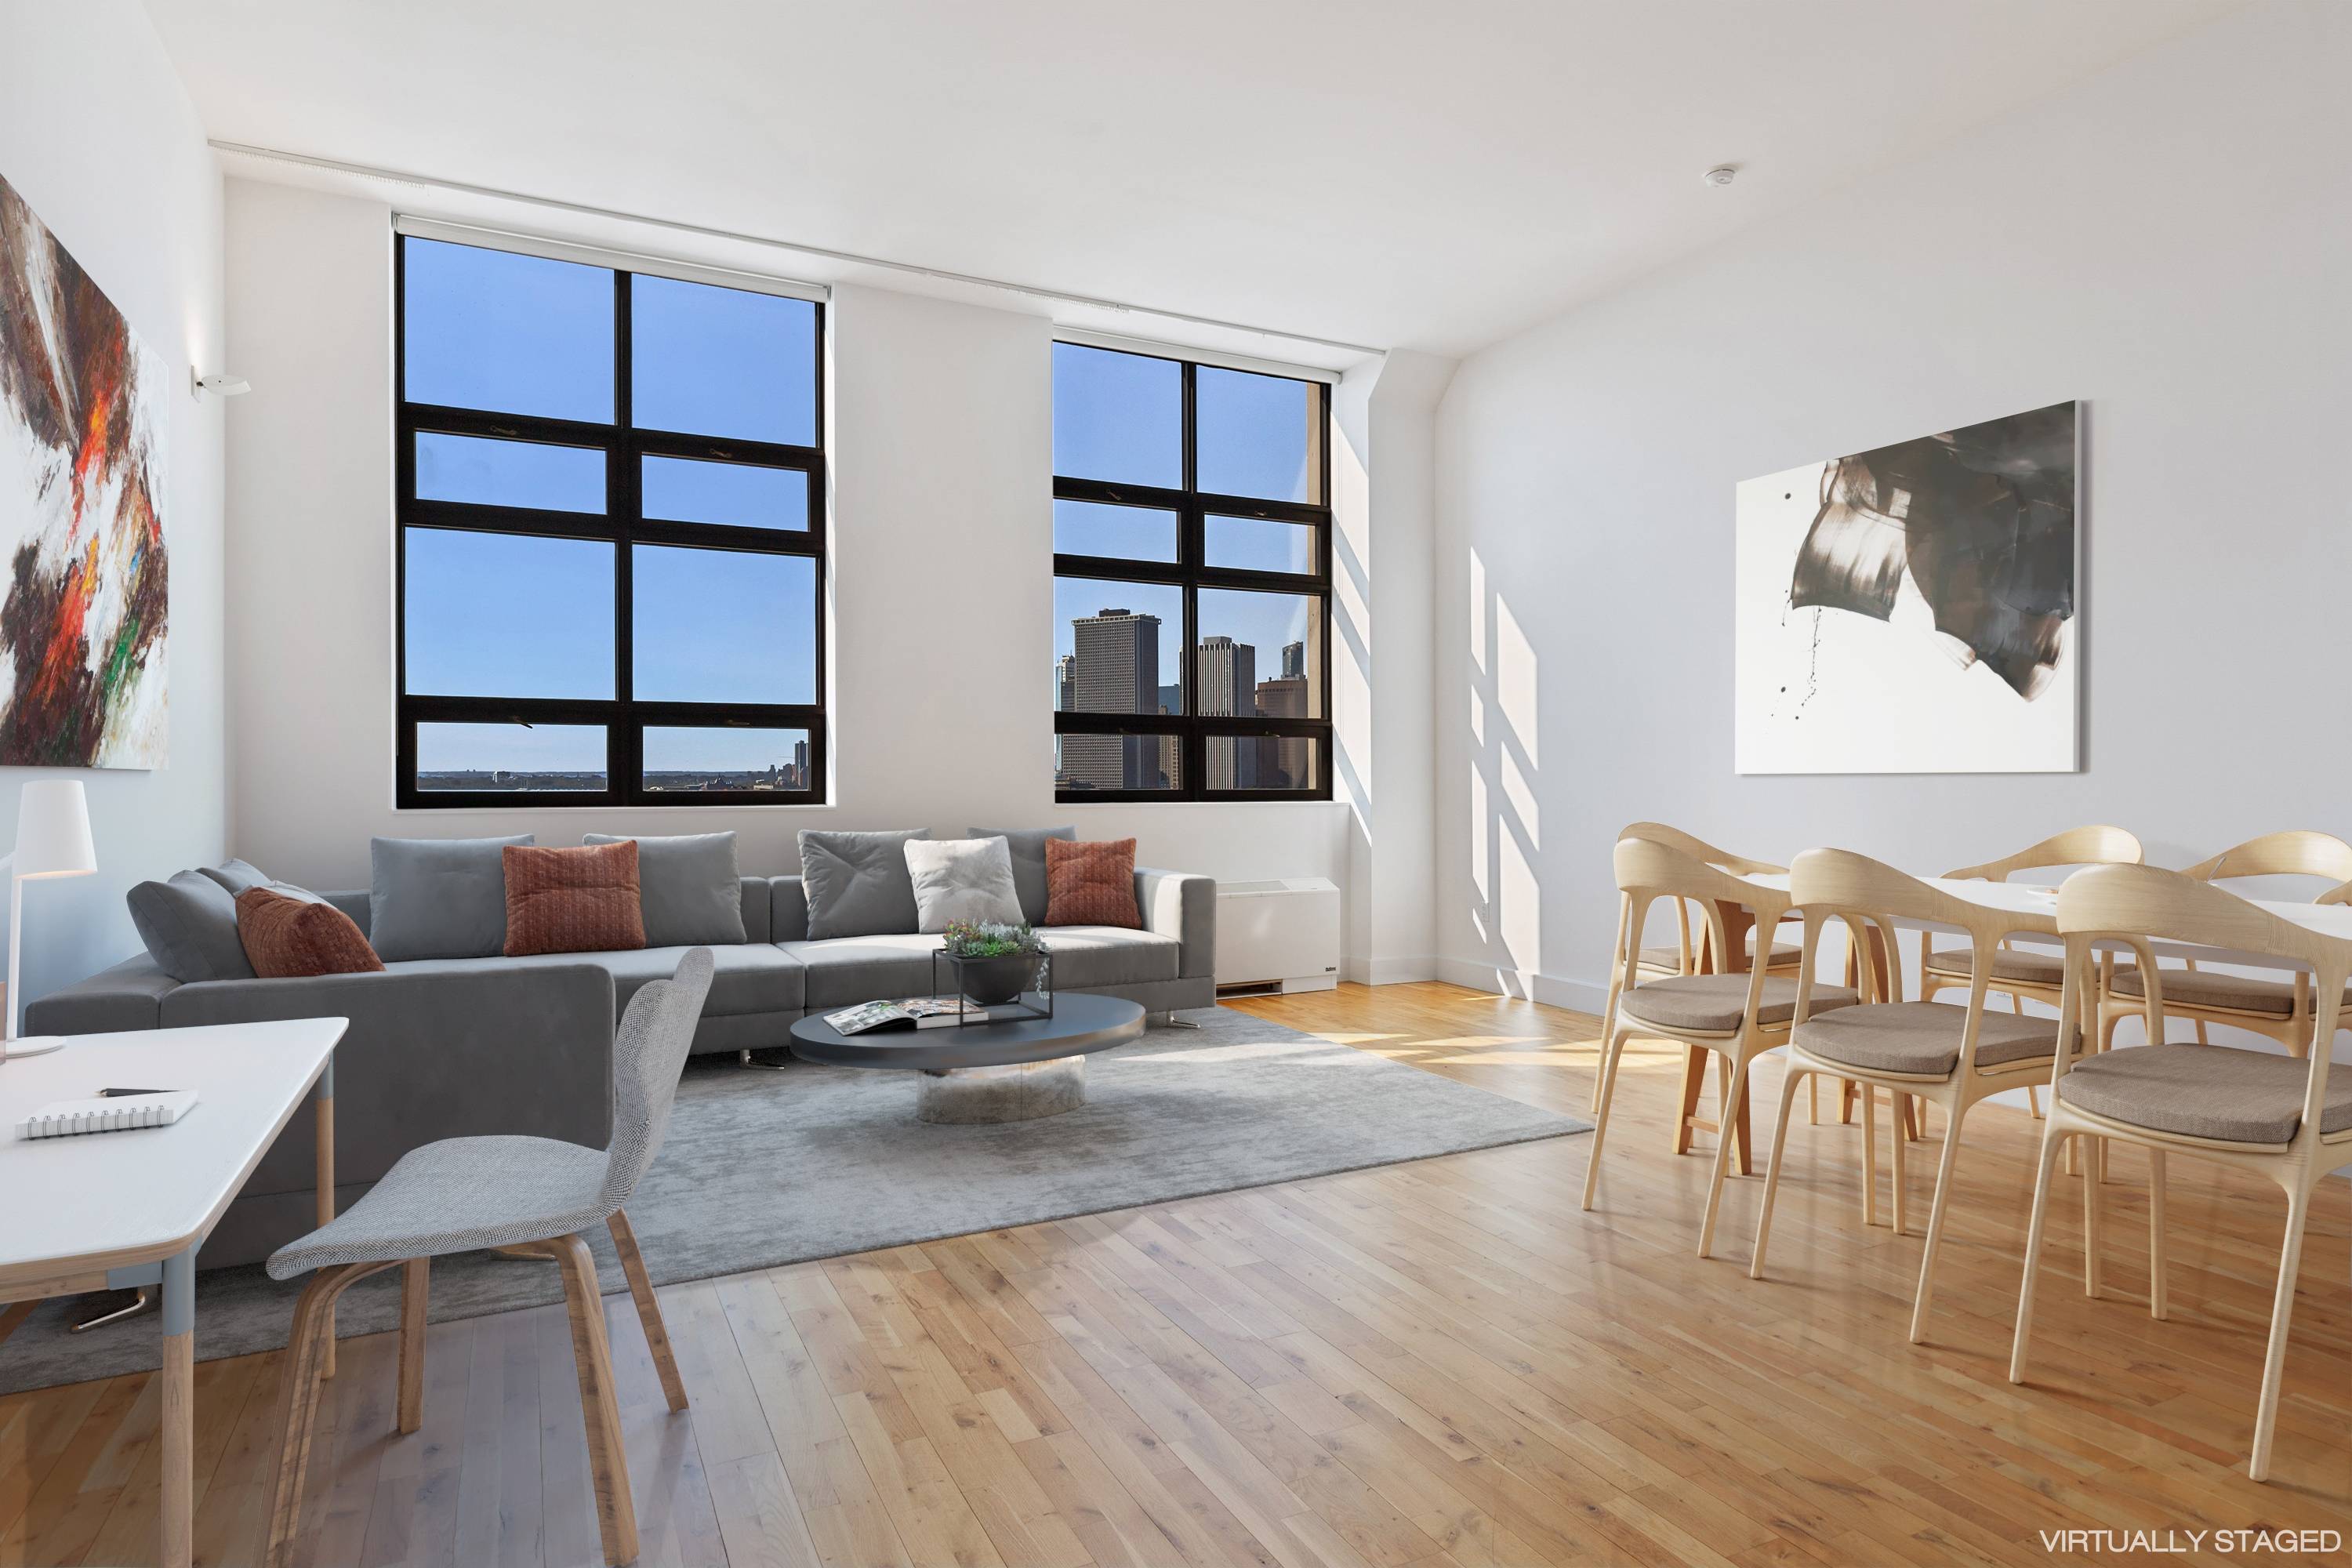 SPACIOUS amp ; STUNNING LOFT WITH HARBOR VIEWS Located in Brooklyn Heights' waterfront Brooklyn Bridge Park, the views of the harbor and lower Manhattan are spectacular from this spacious open ...